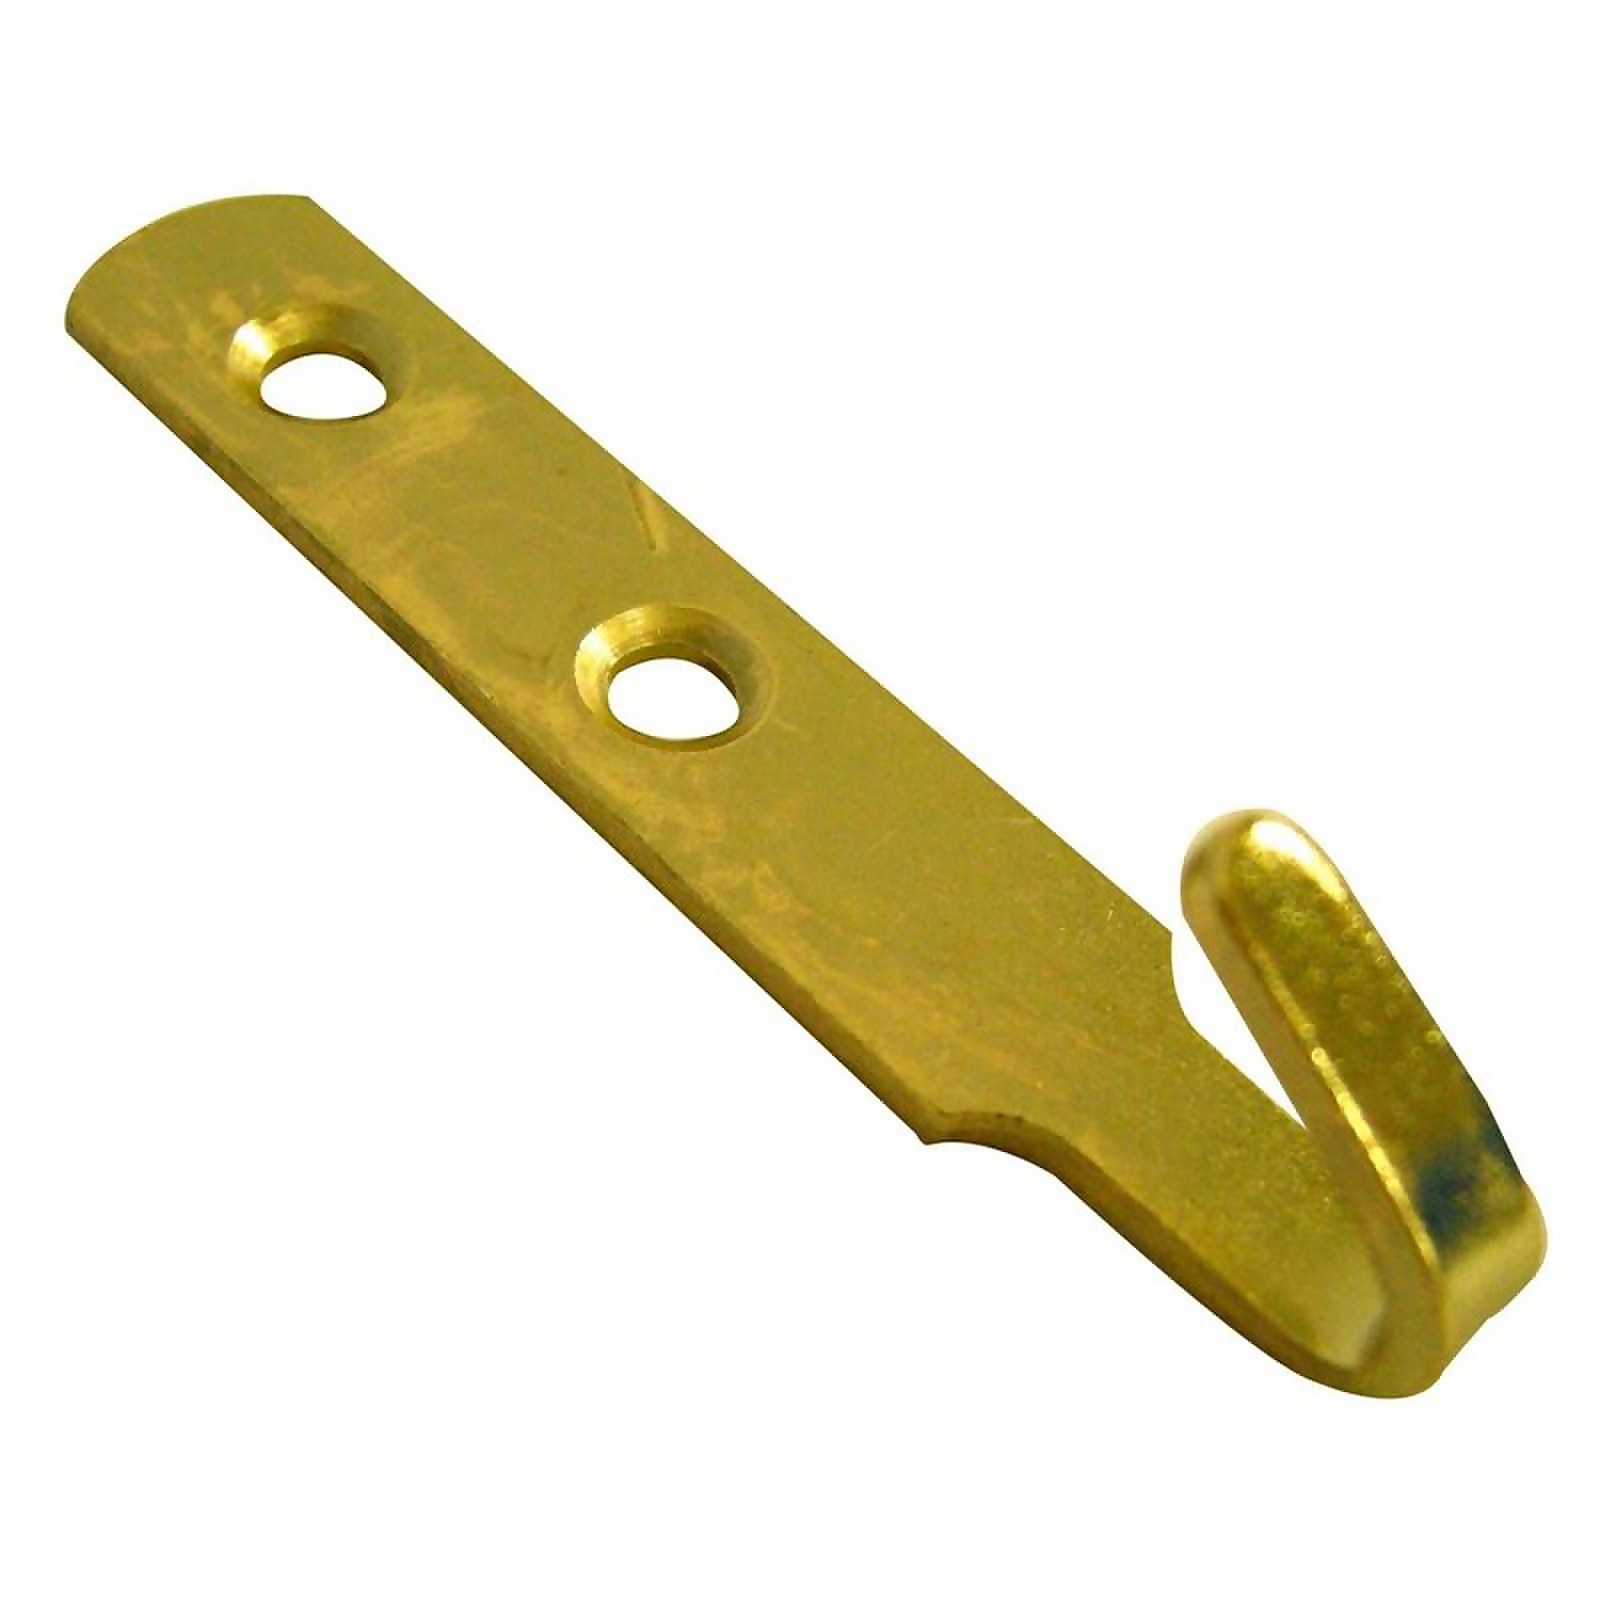 Photo of Large J Picture Hooks - Brass - 2 Pack